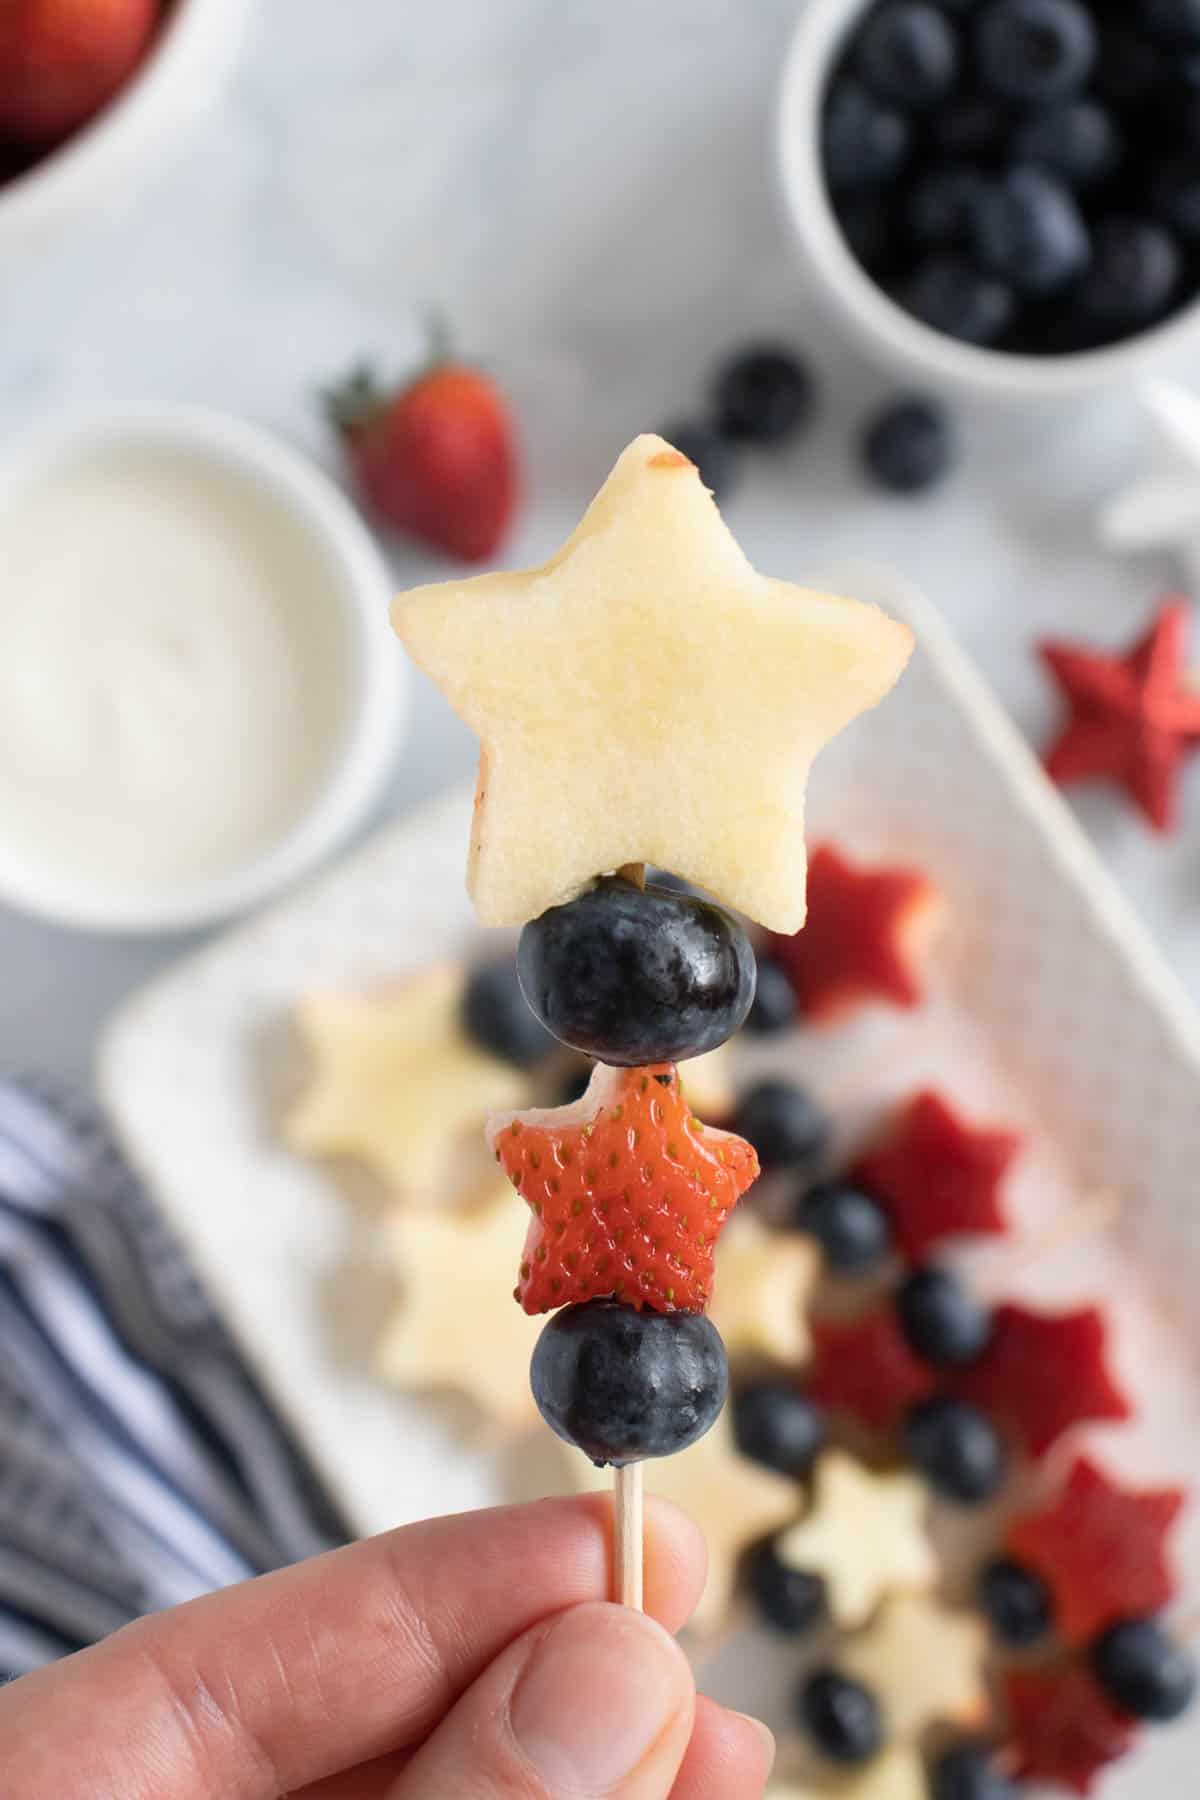 A patriotic fruit kabob made with strawberries, blueberries, and apples held over a yogurt dip.